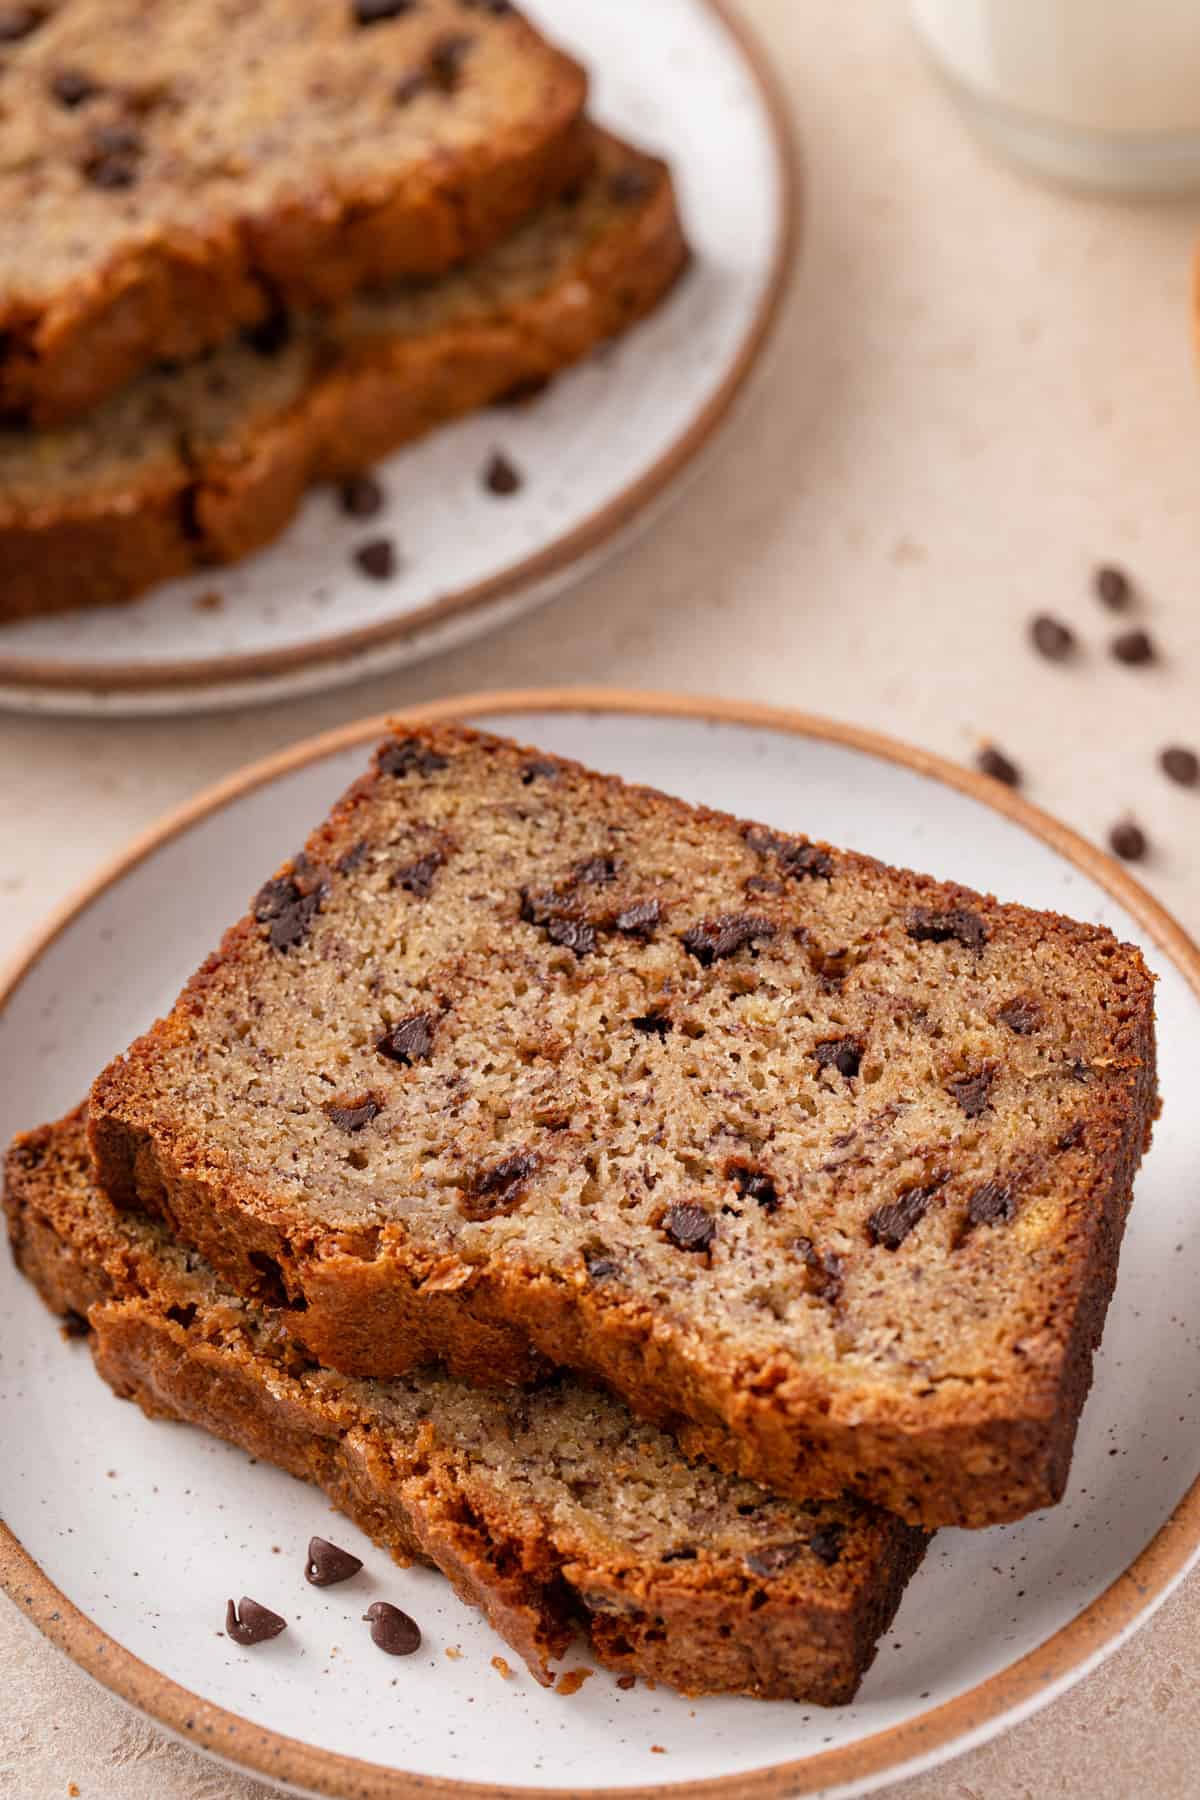 Two slices of chocolate chip banana bread on a plate.